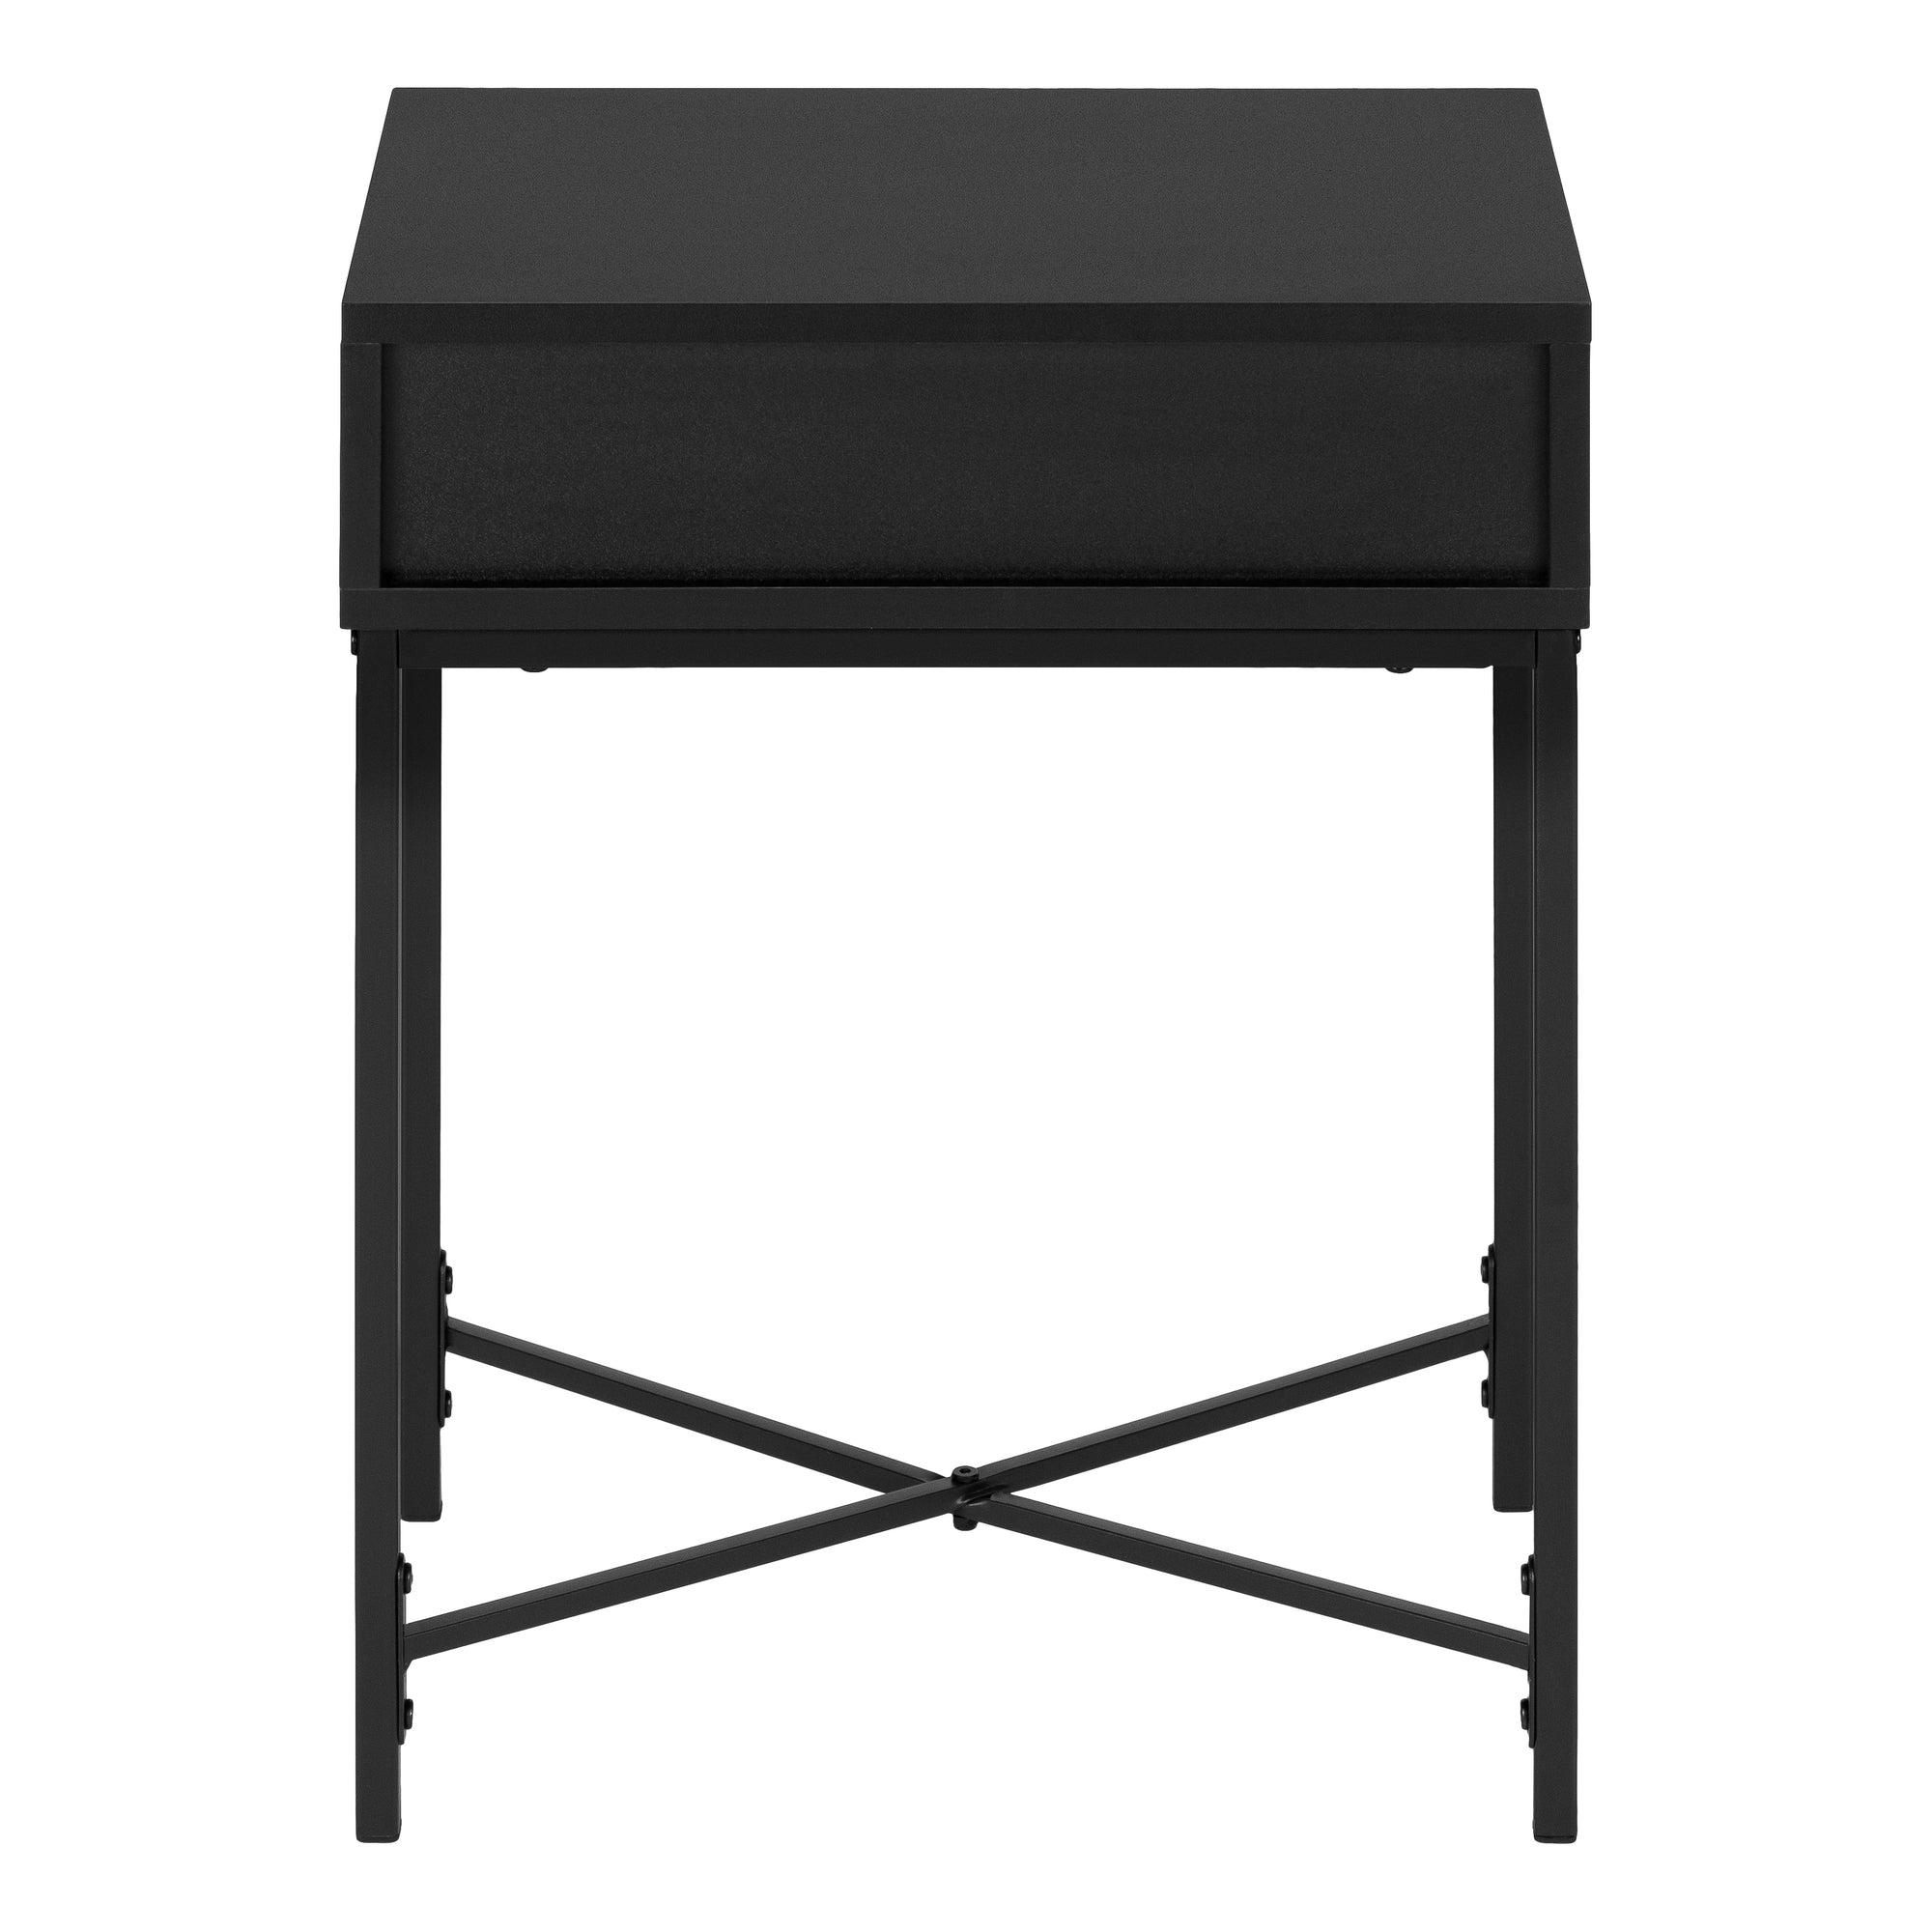 MN-283542    Accent Table, Side, End, Nightstand, Lamp, Living Room, Bedroom, Metal Legs, Laminate, Black, Contemporary, Modern